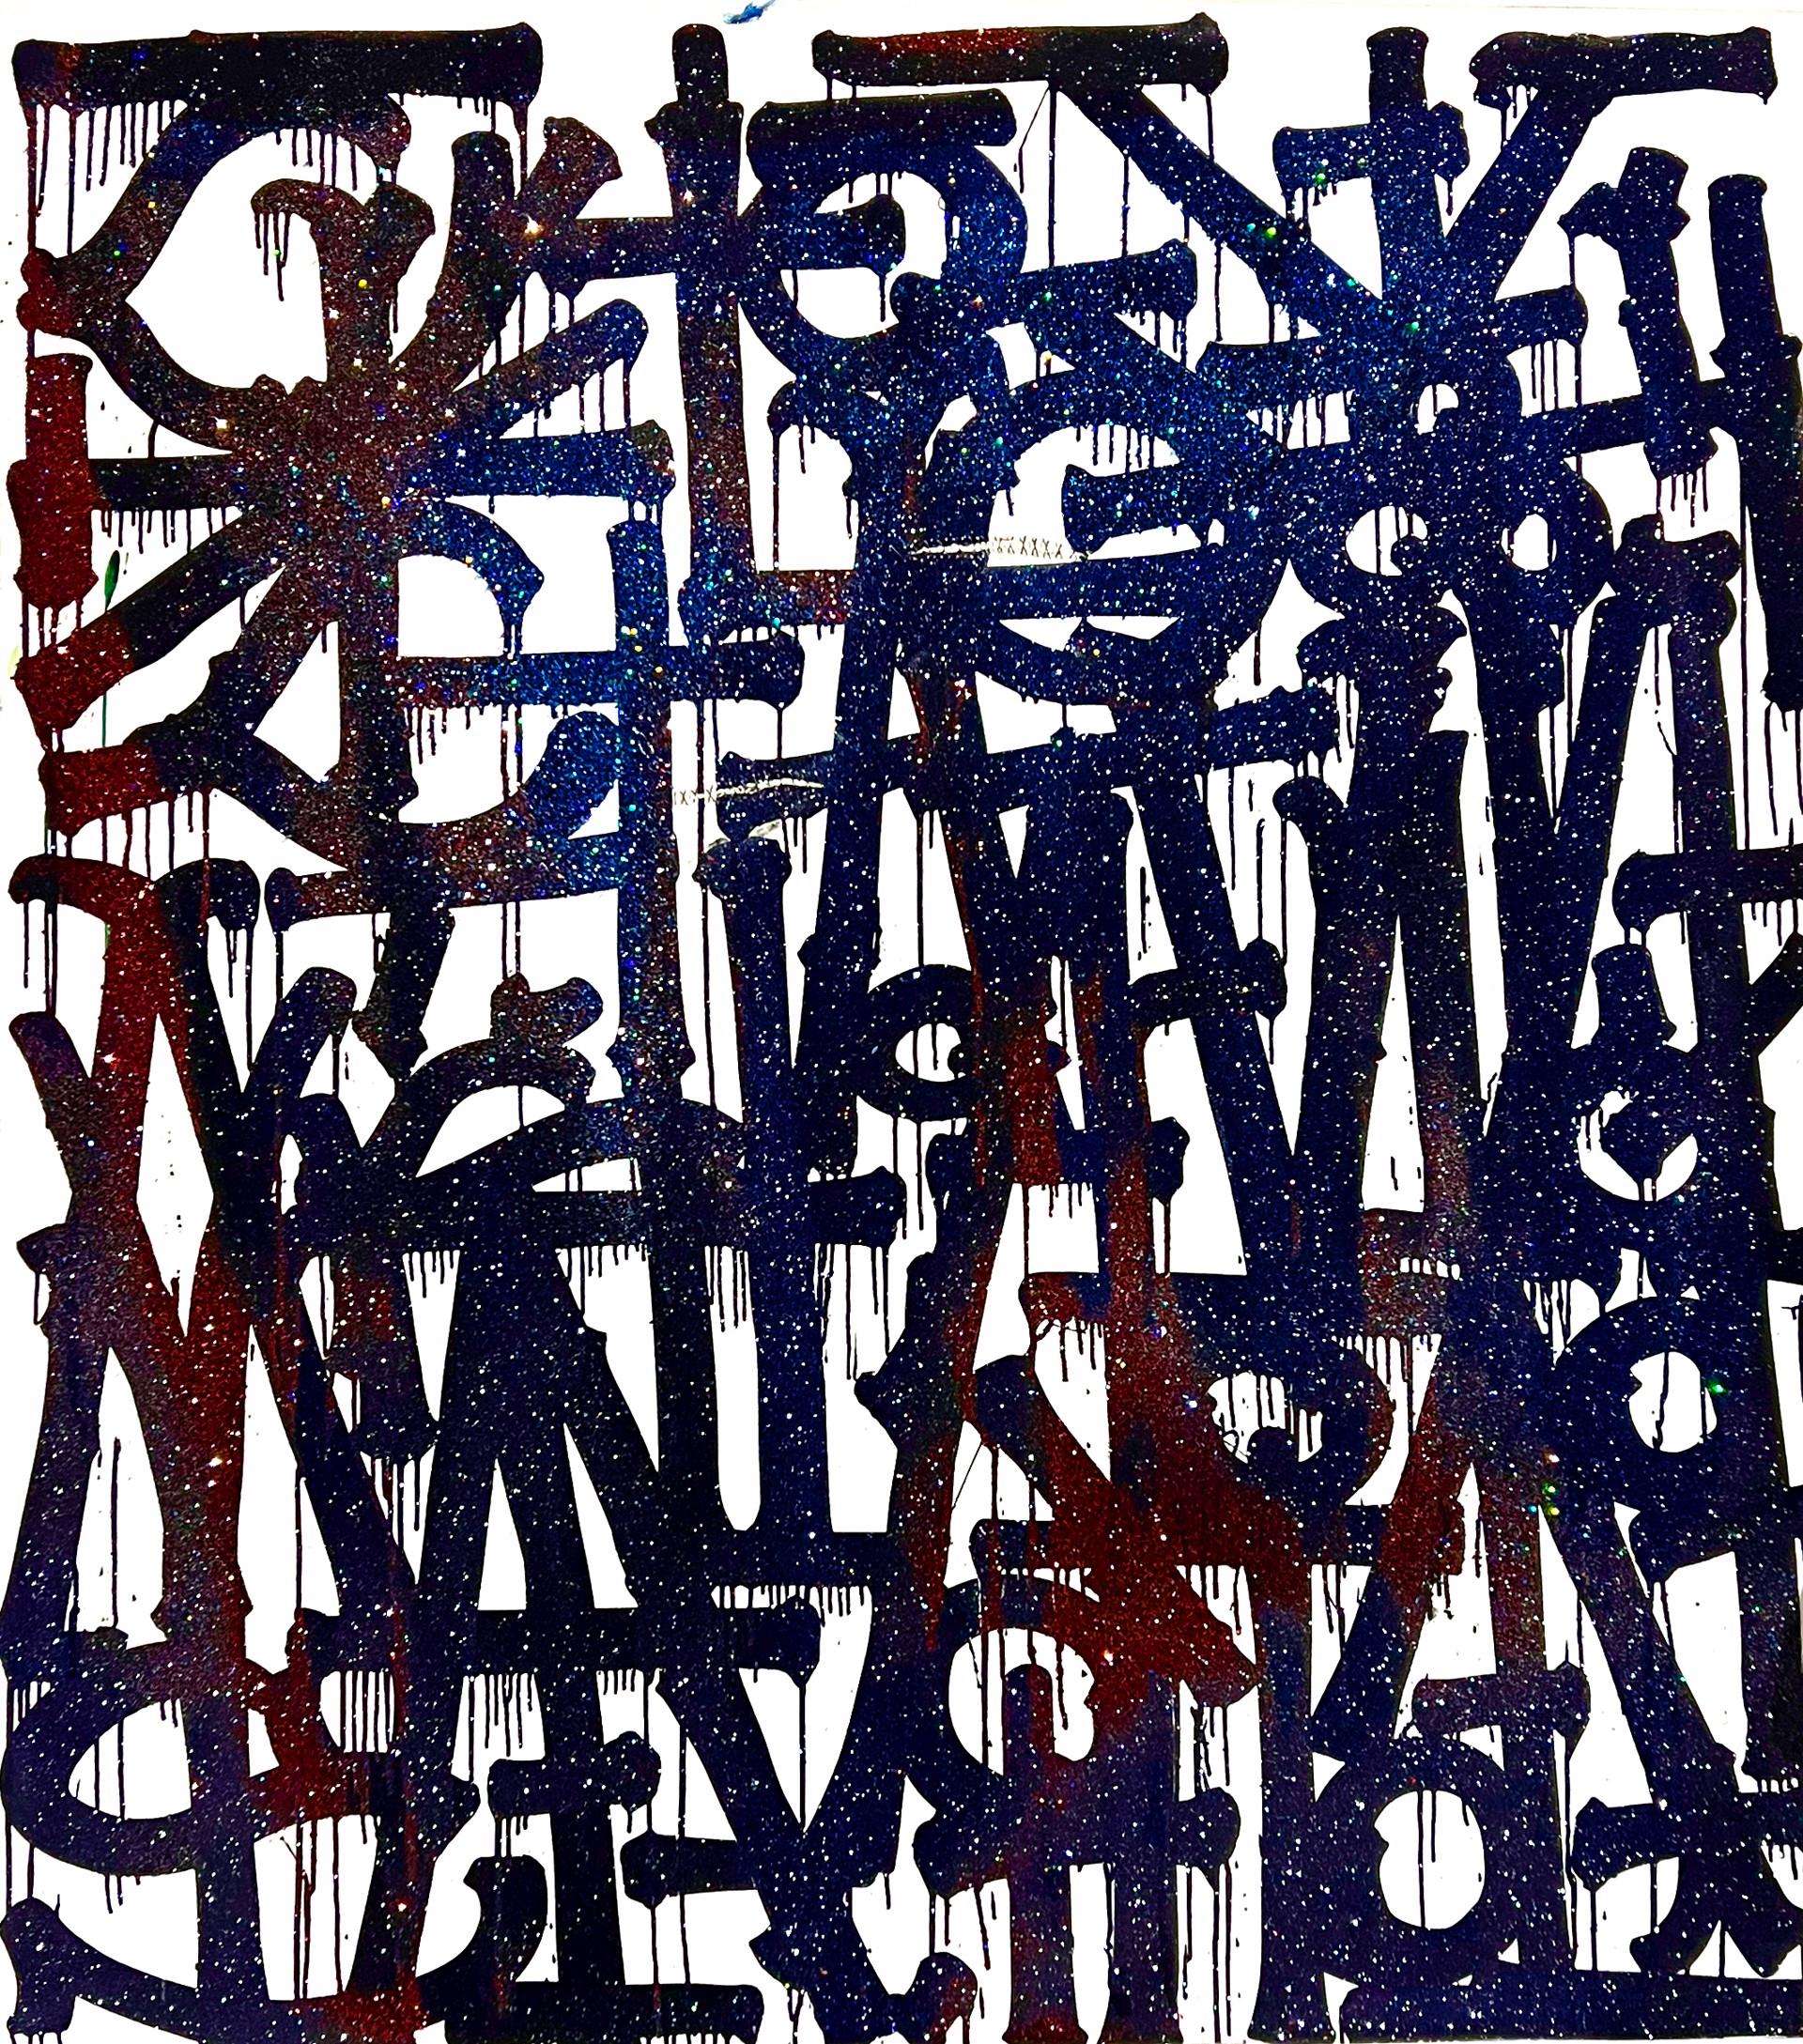 A Night's Rest - Painting by RETNA